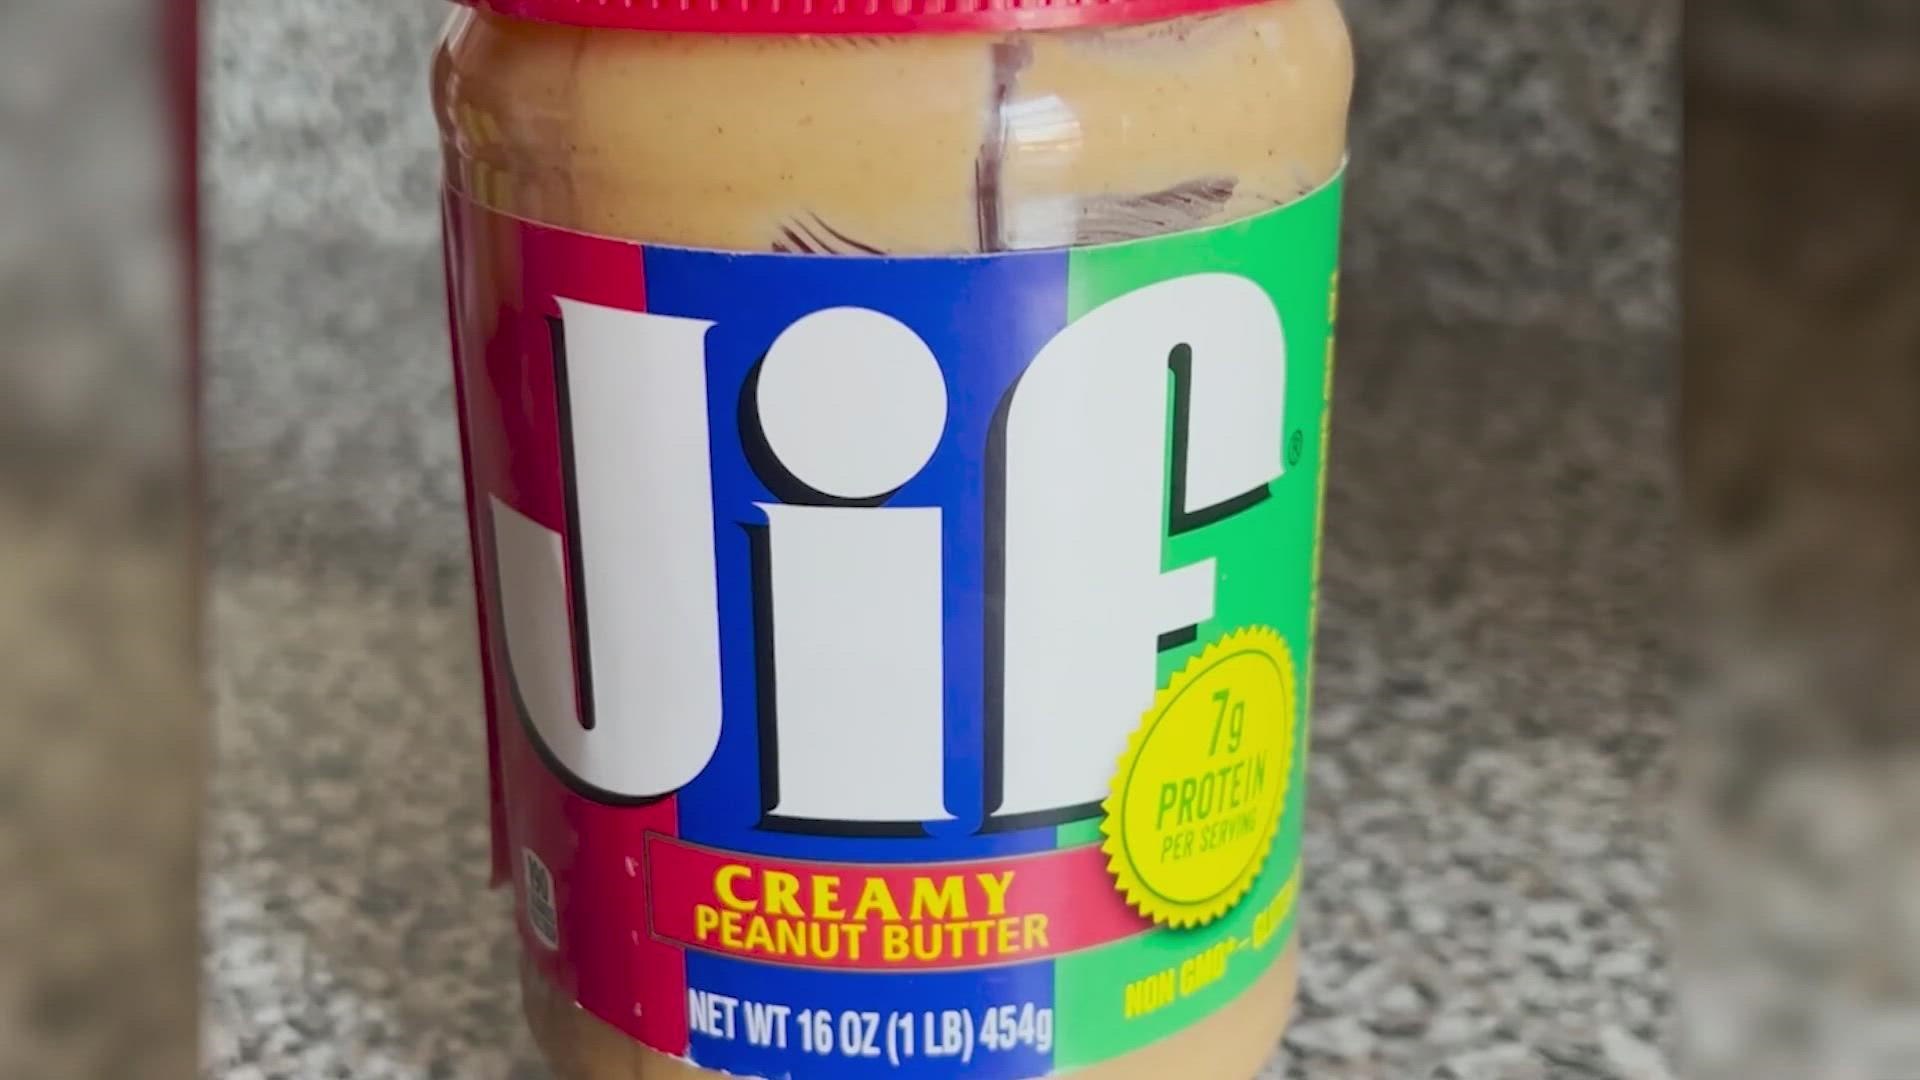 The FDA recommends washing and sanitizing any surfaces that may have come in contact with the peanut butter